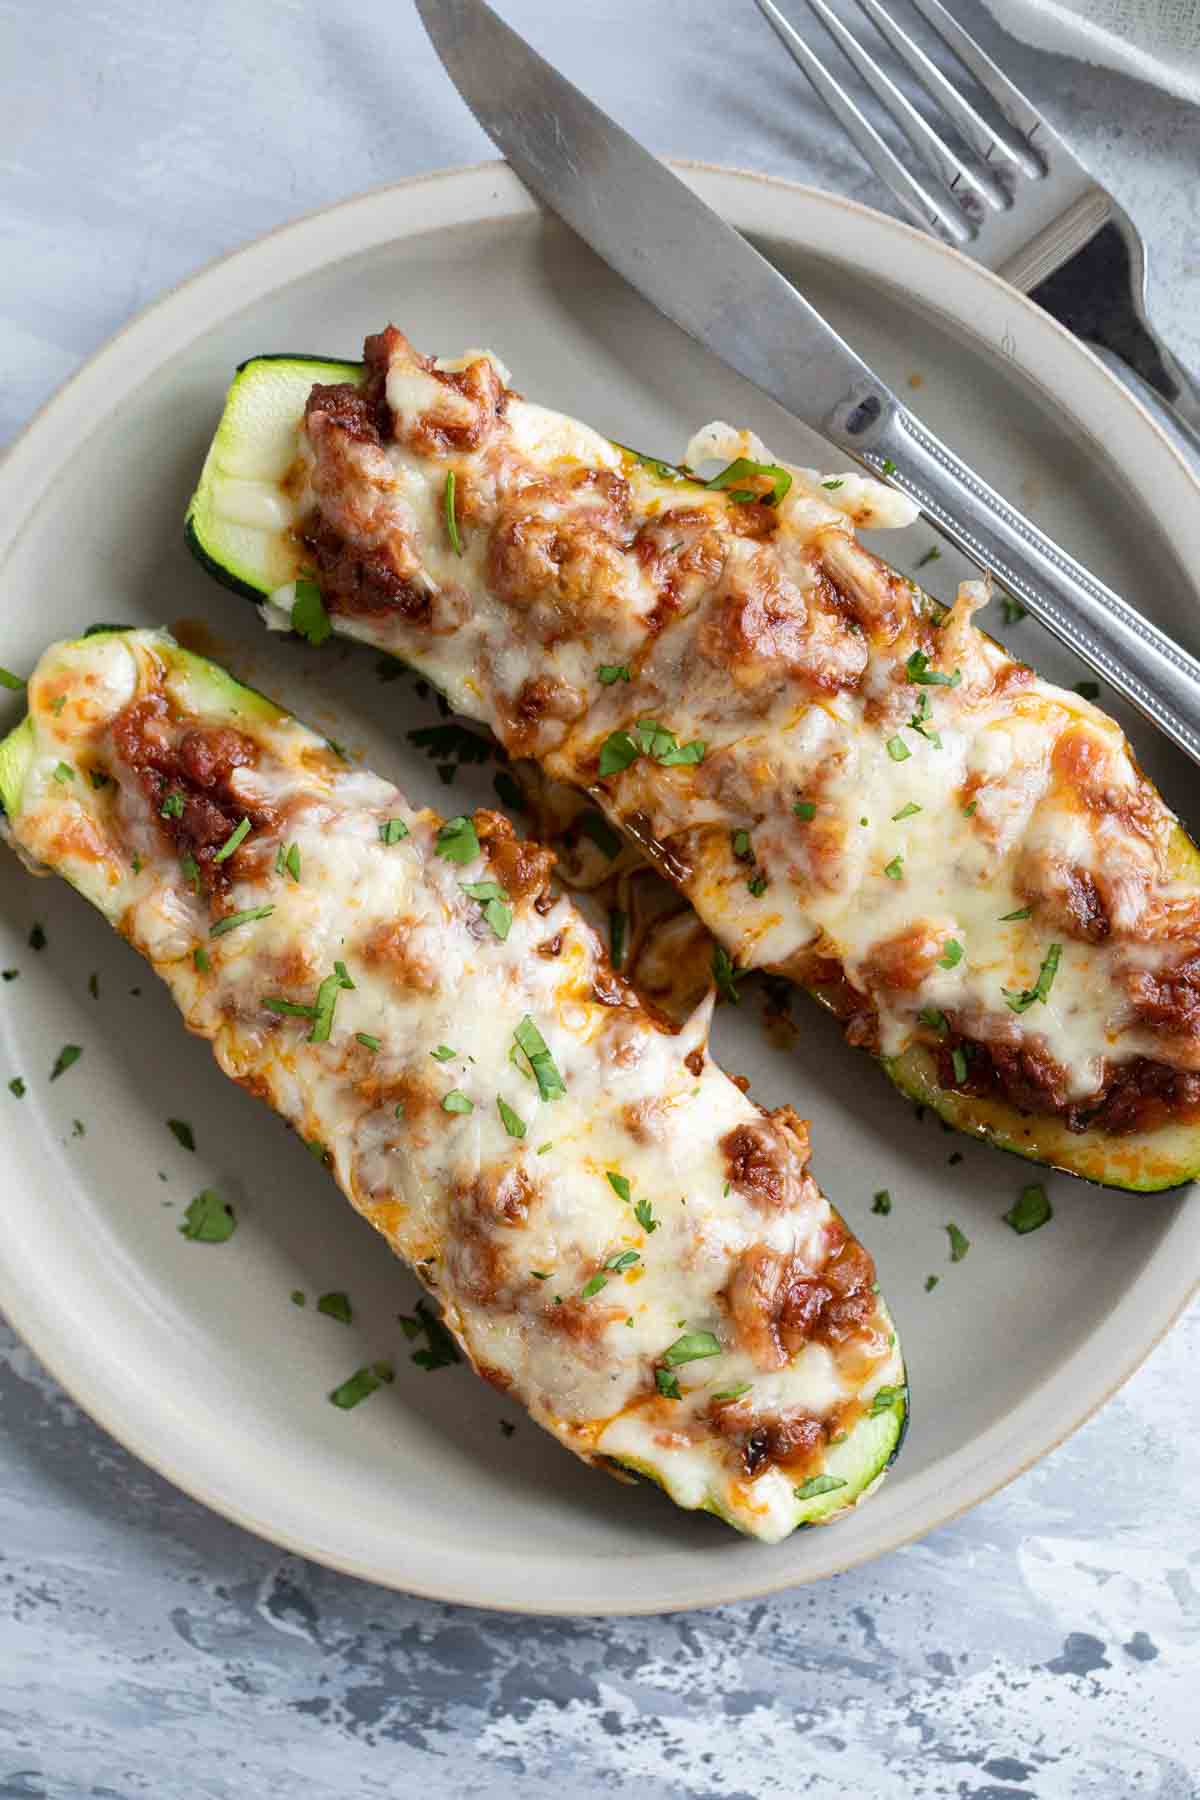 Two stuffed zucchini boat halves on a plate with a knife next to them.